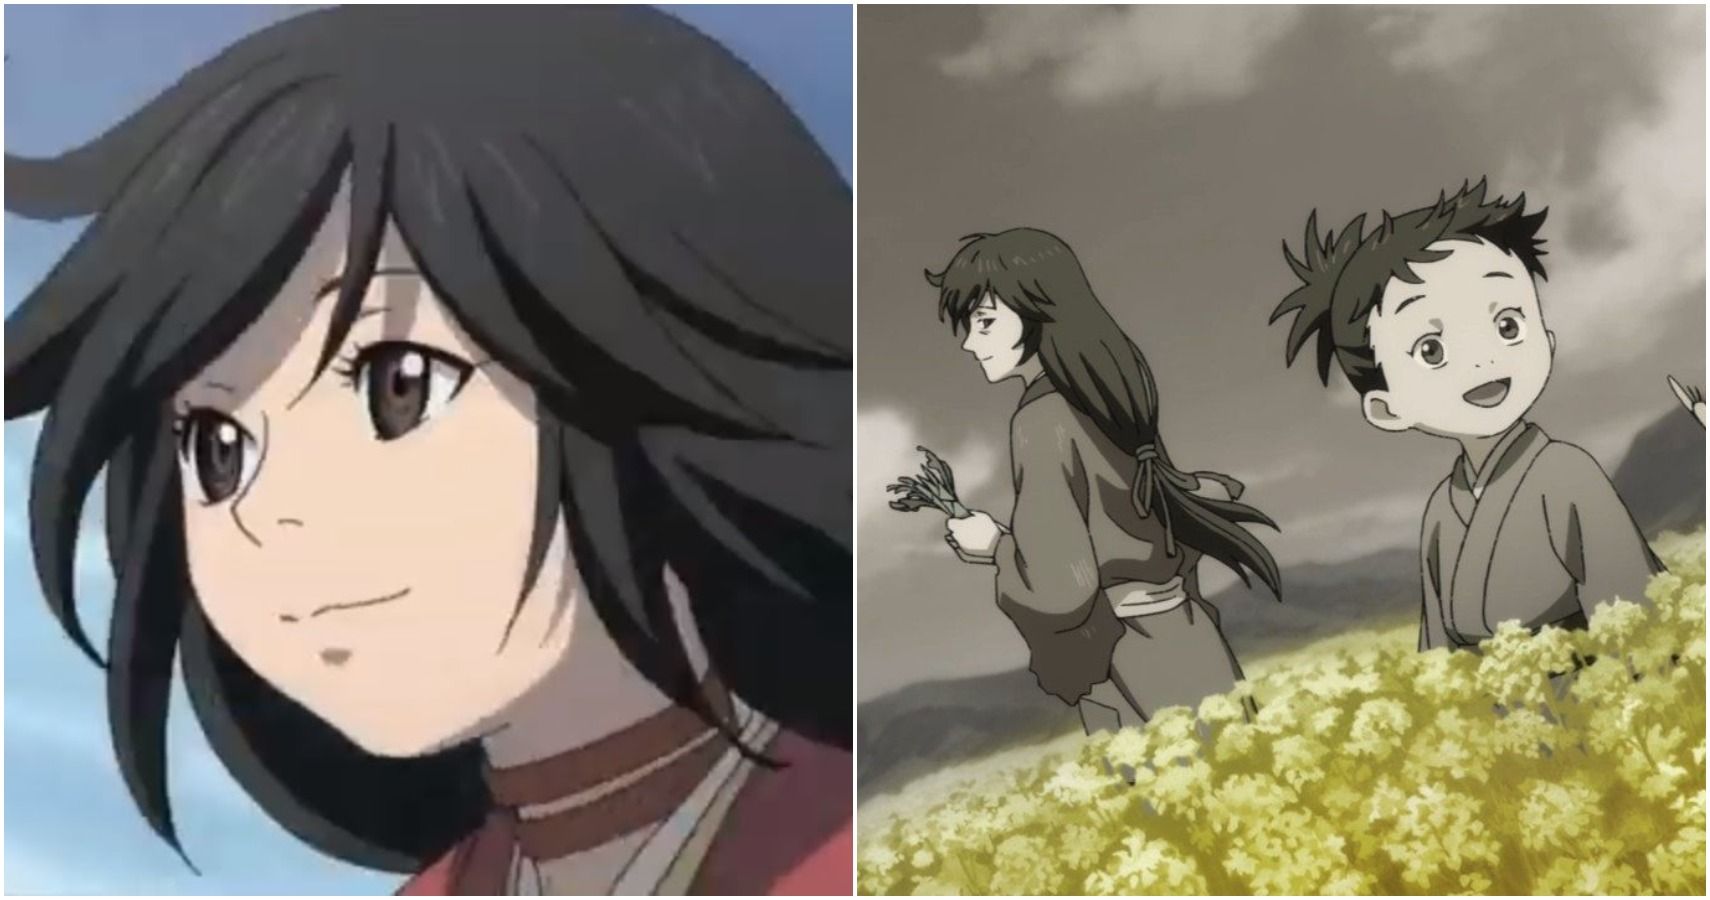 Dororo anime: How many Dororo anime are there? Watch order explained